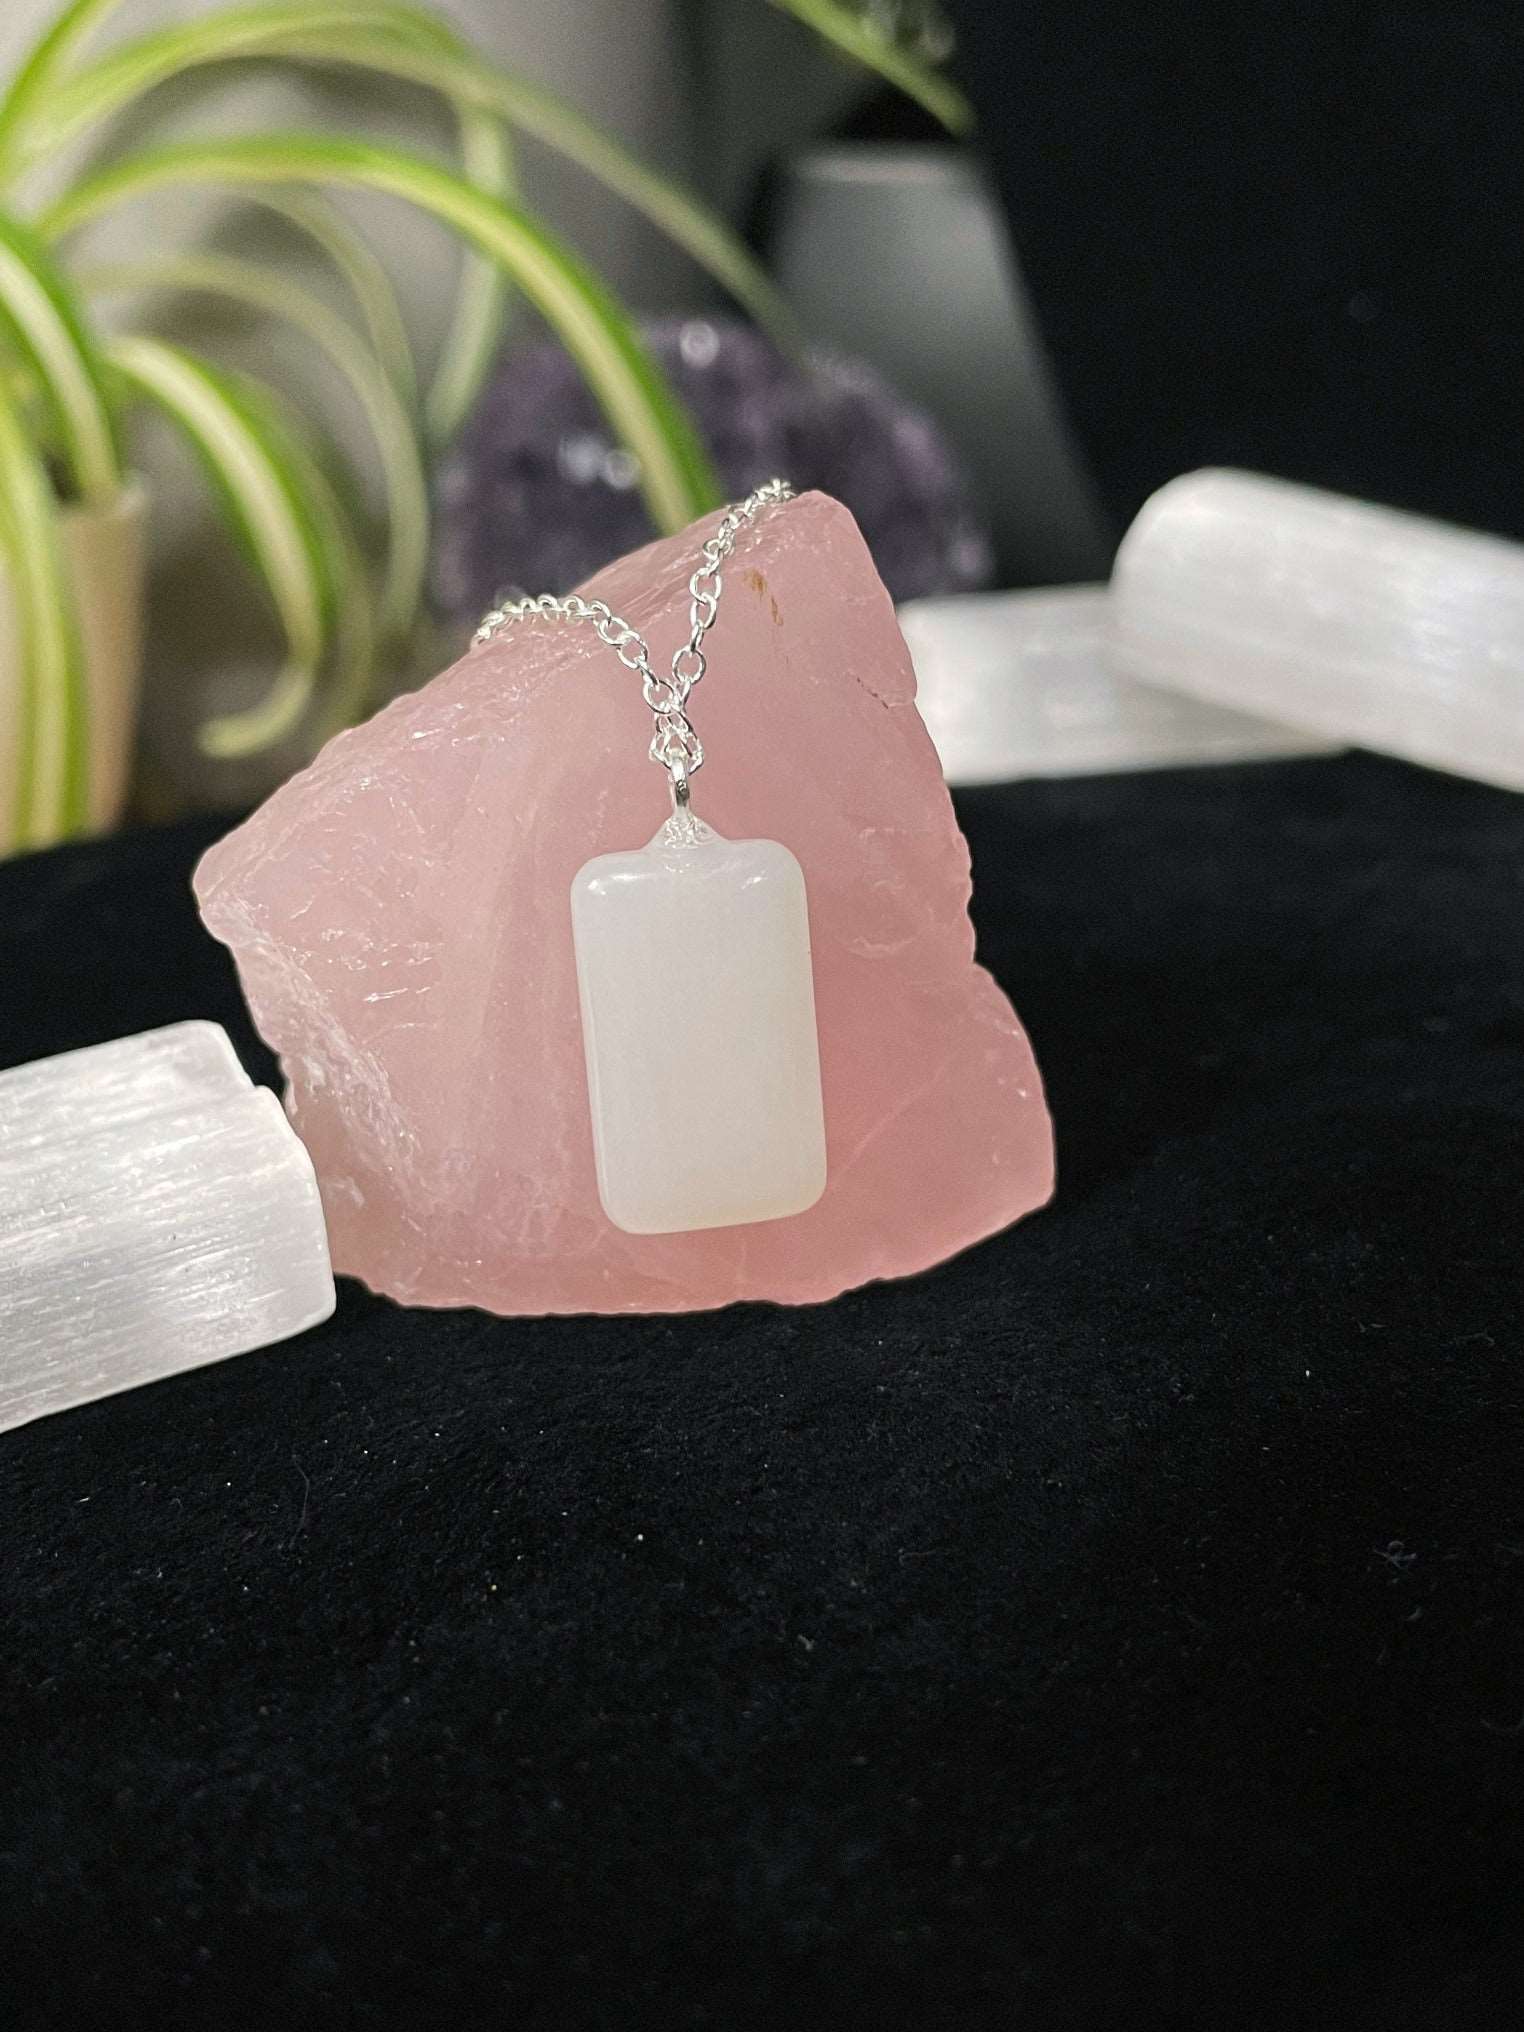 An image of a genuine hetian white jade rectangle shaped pendant on a necklace. It sits atop some selenite chunks and a black velvet surface.